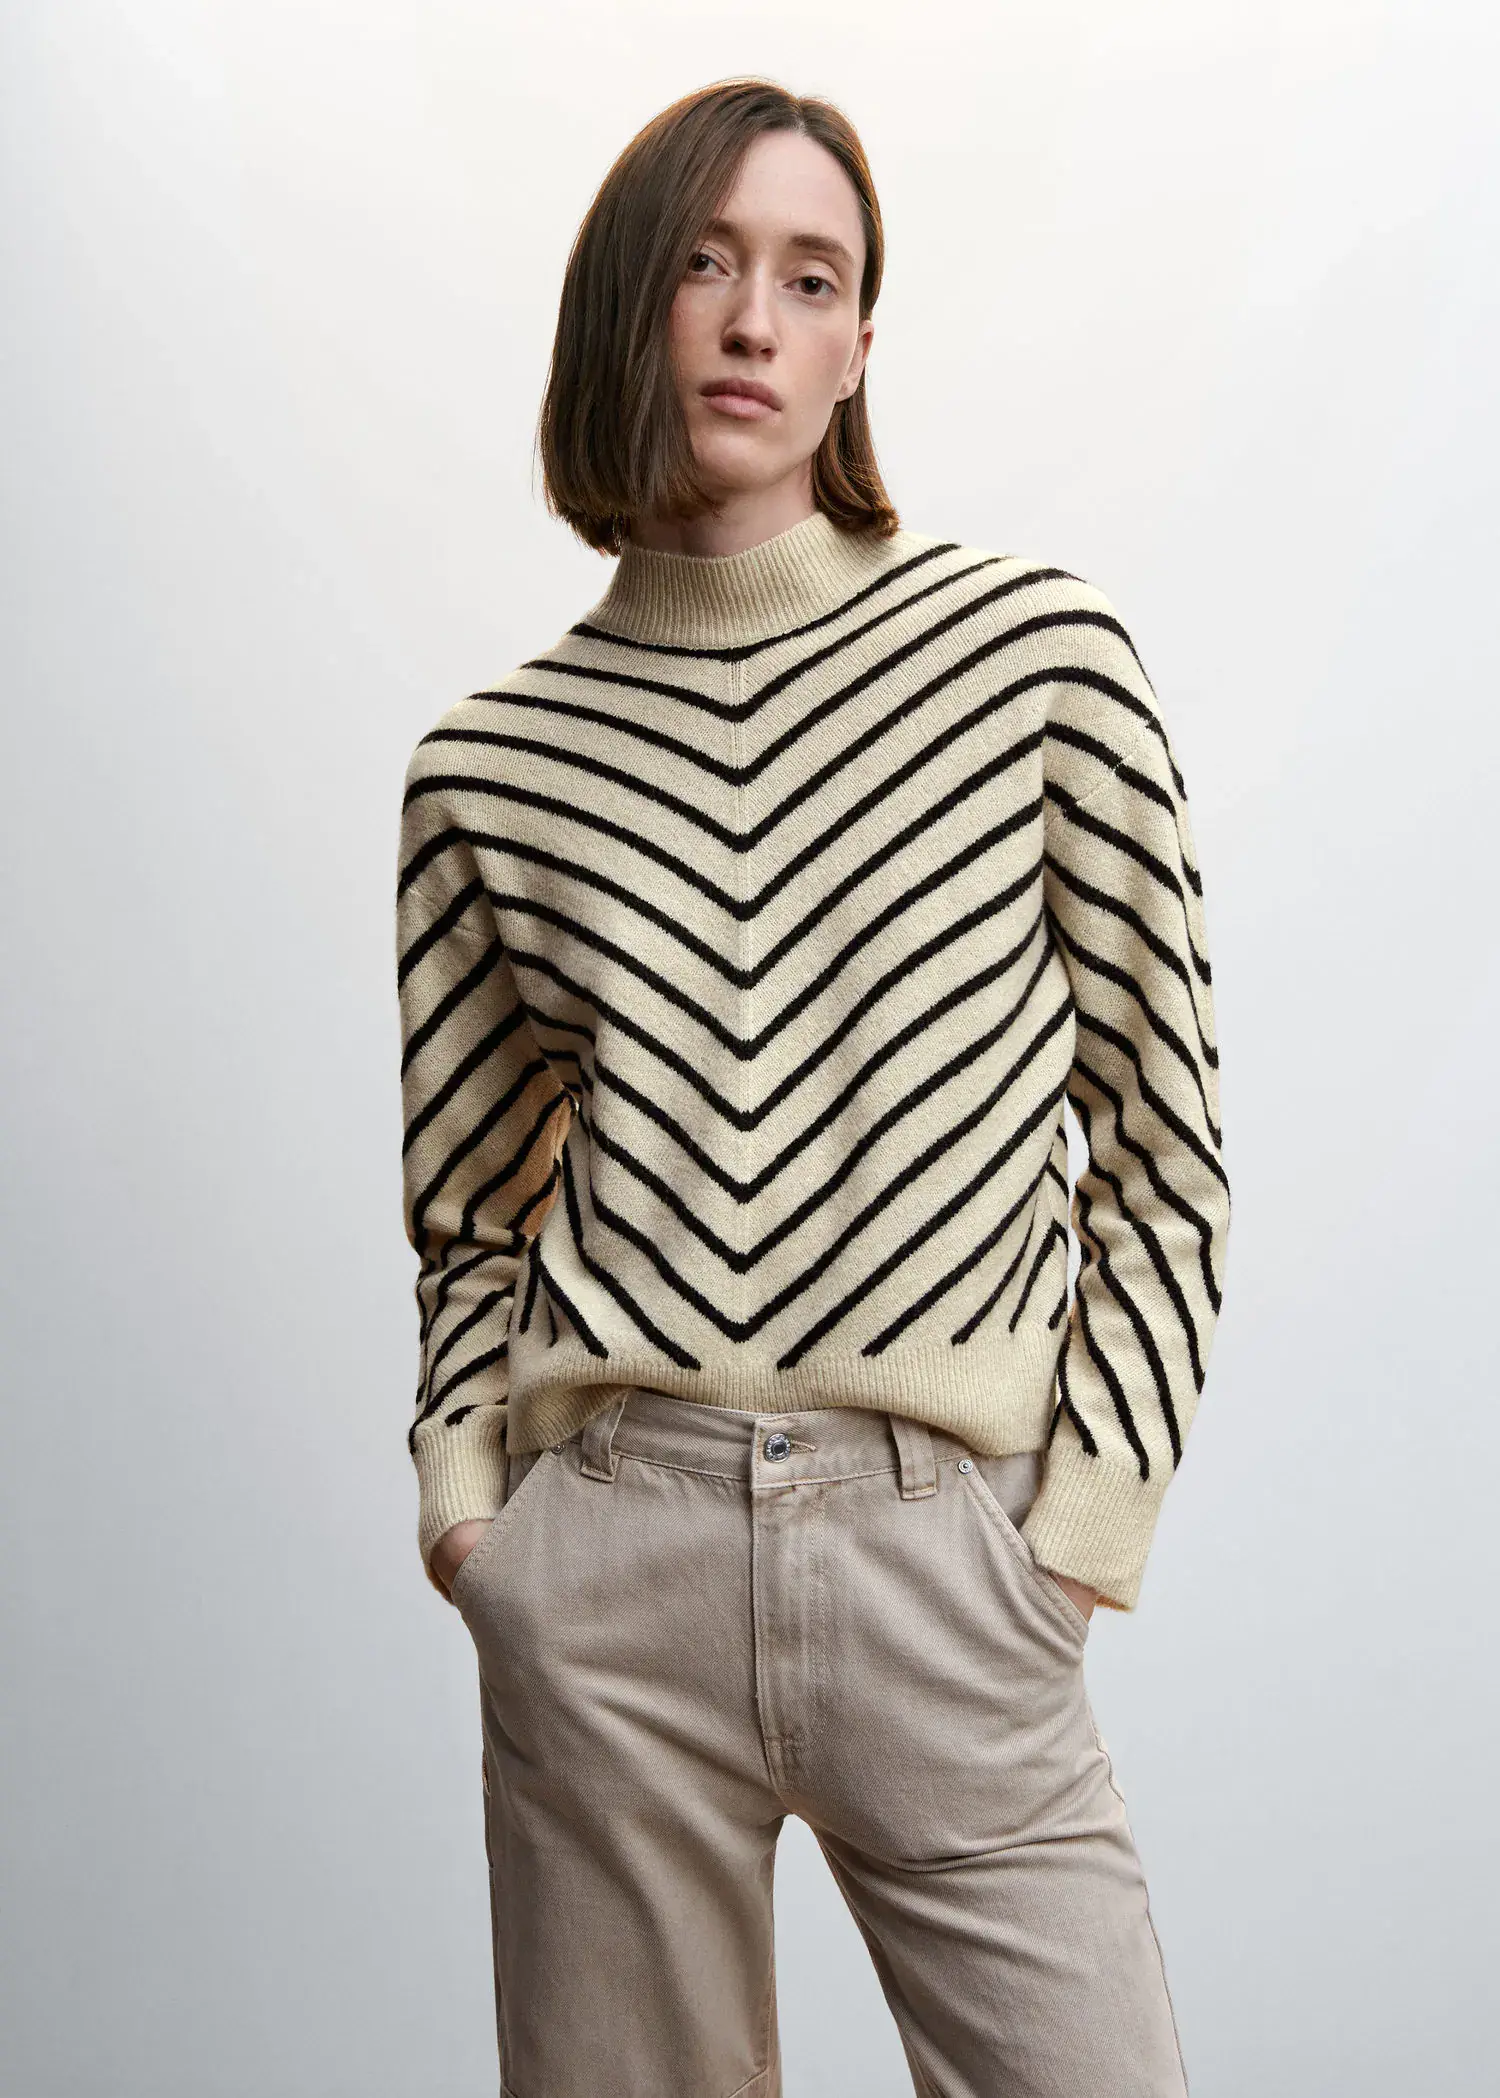 Mango Stripe-print sweater with Perkins neck. a woman in a striped sweater standing with her hands in her pockets. 